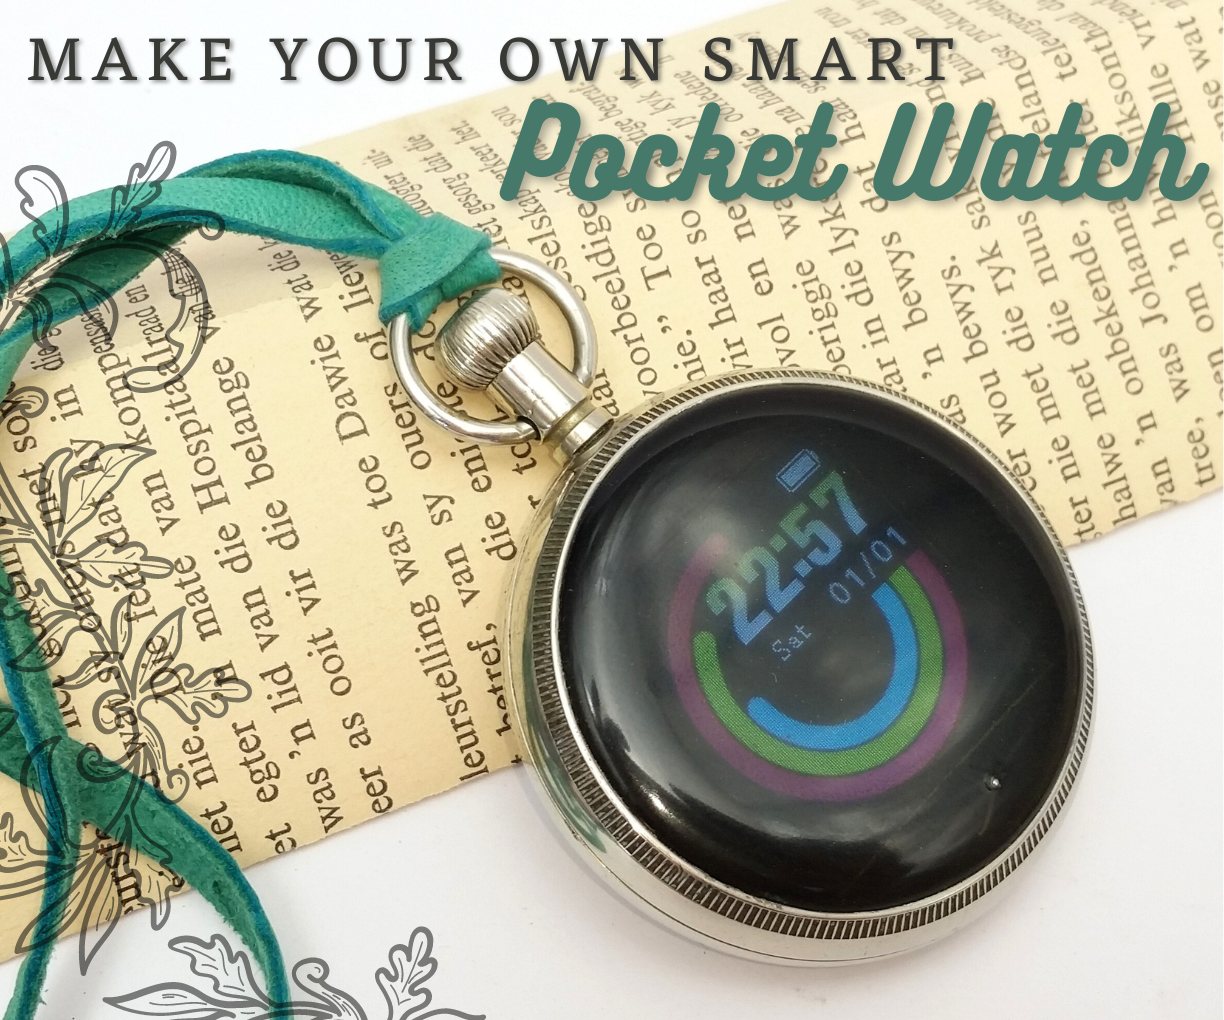 Make Your Own Smart Pocket Watch!